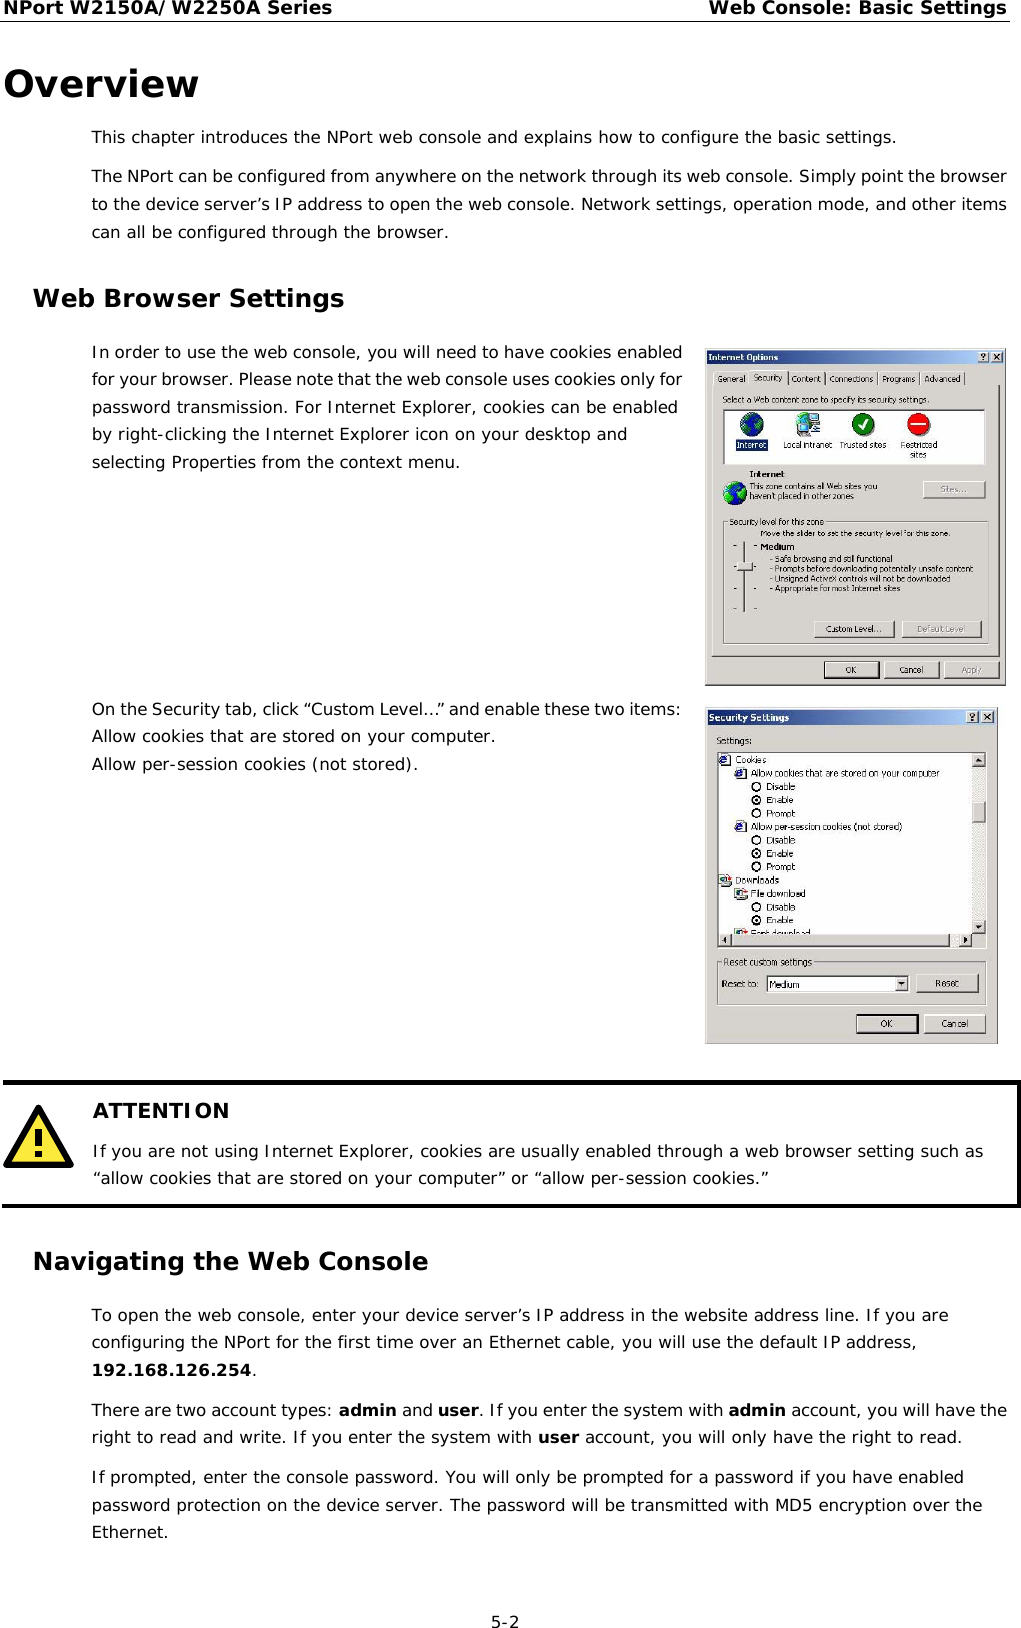 NPort W2150A/W2250A Series Web Console: Basic Settings  5-2 Overview This chapter introduces the NPort web console and explains how to configure the basic settings. The NPort can be configured from anywhere on the network through its web console. Simply point the browser to the device server’s IP address to open the web console. Network settings, operation mode, and other items can all be configured through the browser. Web Browser Settings In order to use the web console, you will need to have cookies enabled for your browser. Please note that the web console uses cookies only for password transmission. For Internet Explorer, cookies can be enabled by right-clicking the Internet Explorer icon on your desktop and selecting Properties from the context menu.  On the Security tab, click “Custom Level…” and enable these two items: Allow cookies that are stored on your computer. Allow per-session cookies (not stored).    ATTENTION If you are not using Internet Explorer, cookies are usually enabled through a web browser setting such as “allow cookies that are stored on your computer” or “allow per-session cookies.”  Navigating the Web Console To open the web console, enter your device server’s IP address in the website address line. If you are configuring the NPort for the first time over an Ethernet cable, you will use the default IP address, 192.168.126.254. There are two account types: admin and user. If you enter the system with admin account, you will have the right to read and write. If you enter the system with user account, you will only have the right to read. If prompted, enter the console password. You will only be prompted for a password if you have enabled password protection on the device server. The password will be transmitted with MD5 encryption over the Ethernet. 